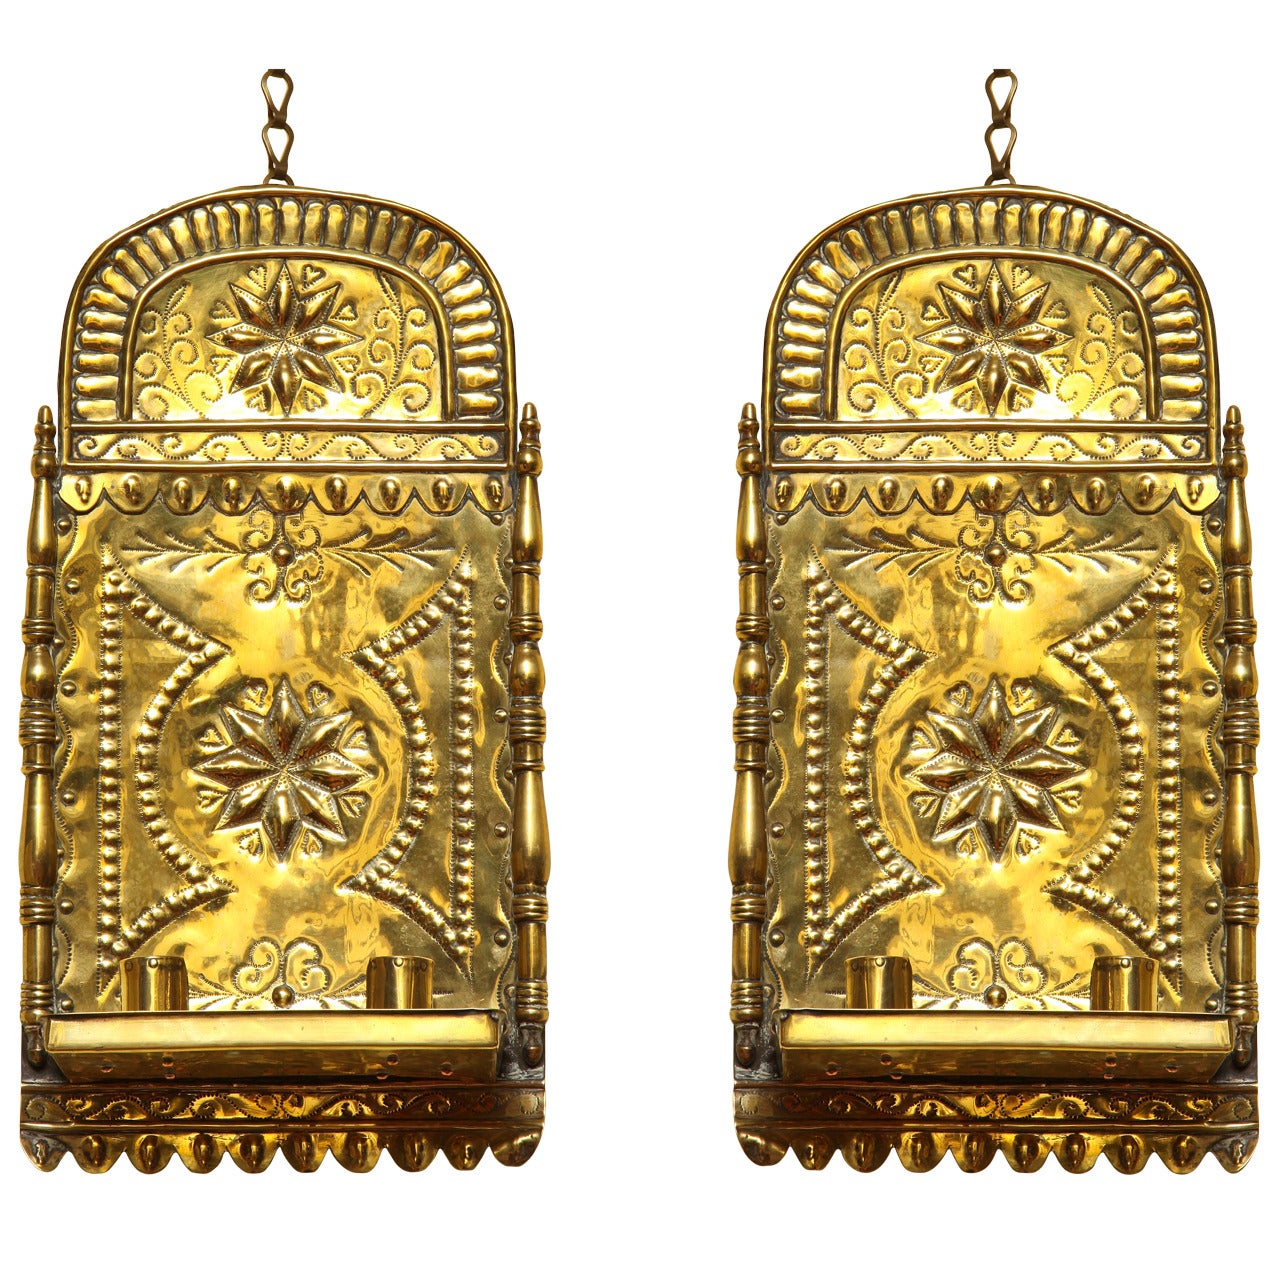 Pair of Antique Repoussé Brass Star and Heart Wall Sconces, Dutch, circa 1880 For Sale